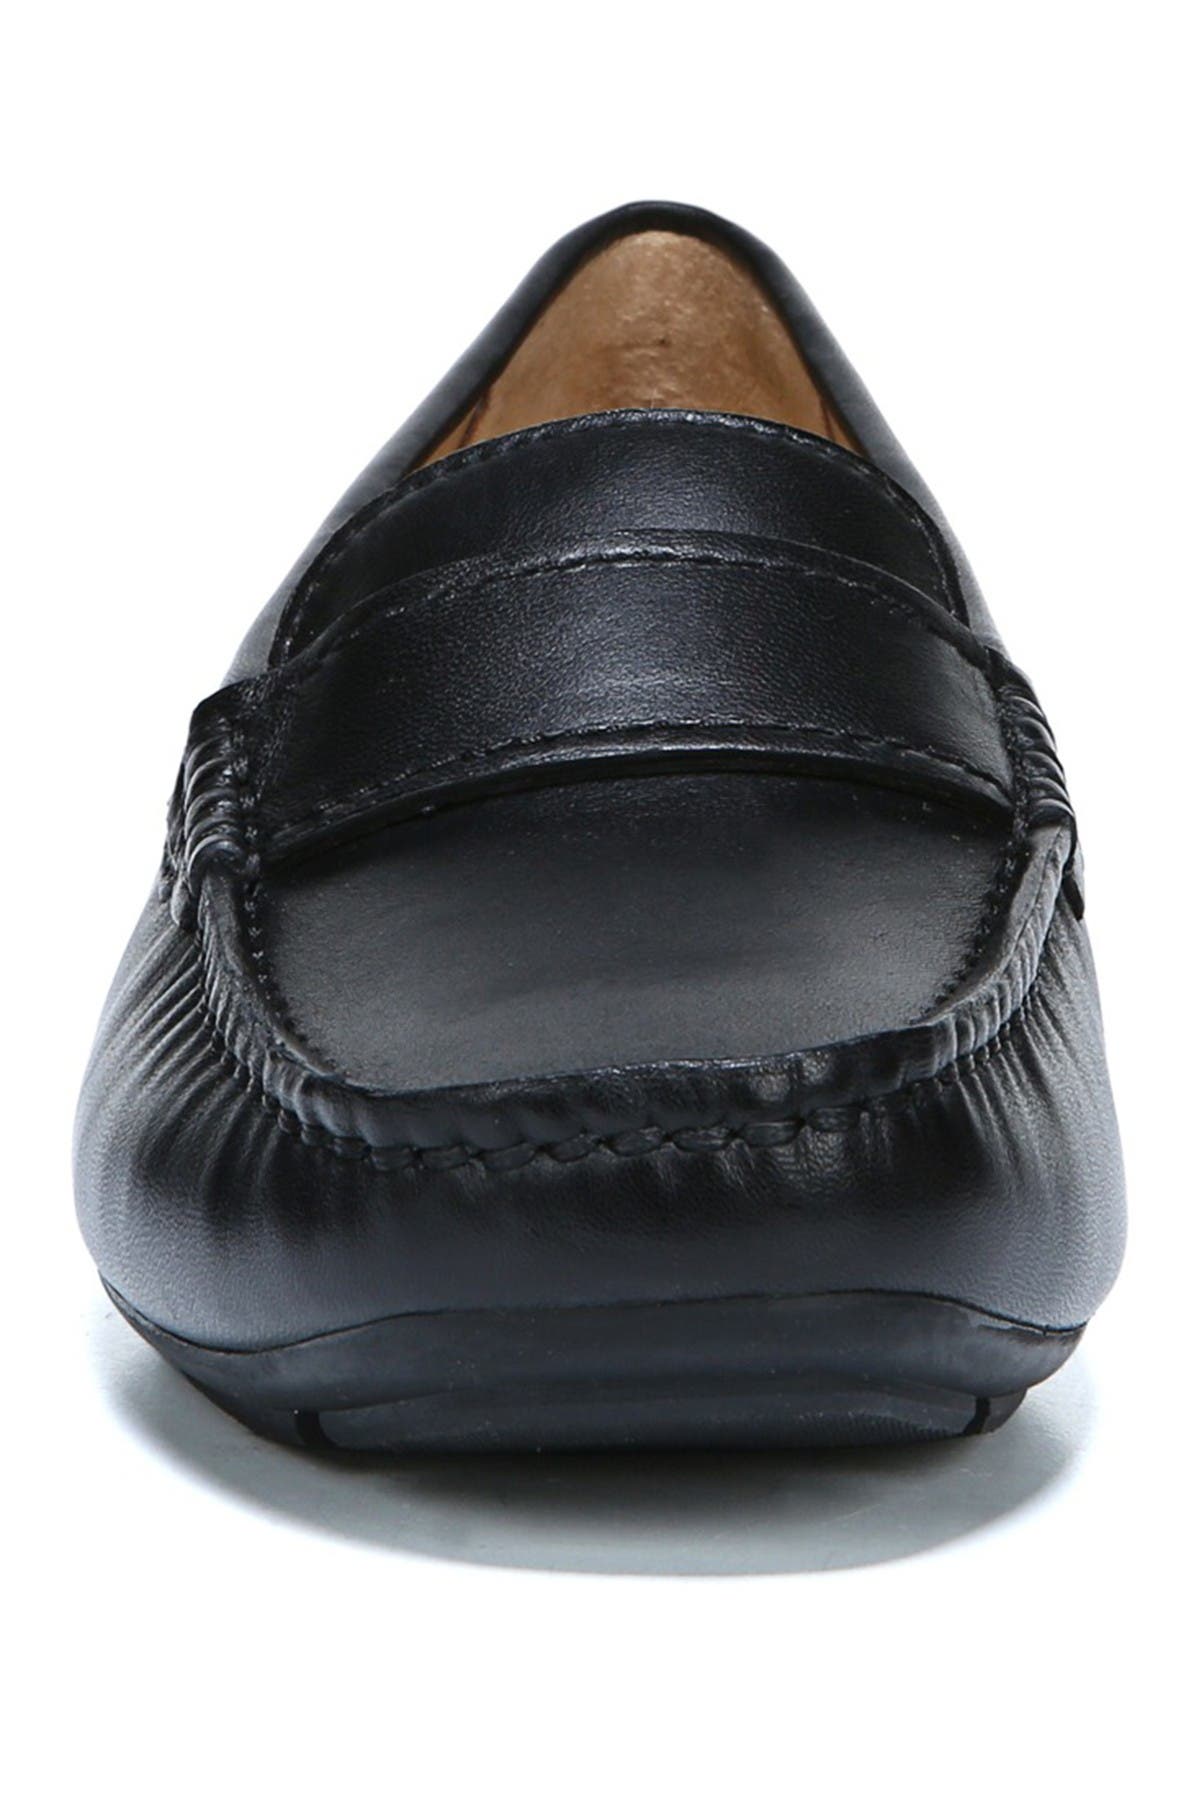 Naturalizer | Brynn Leather Loafer 